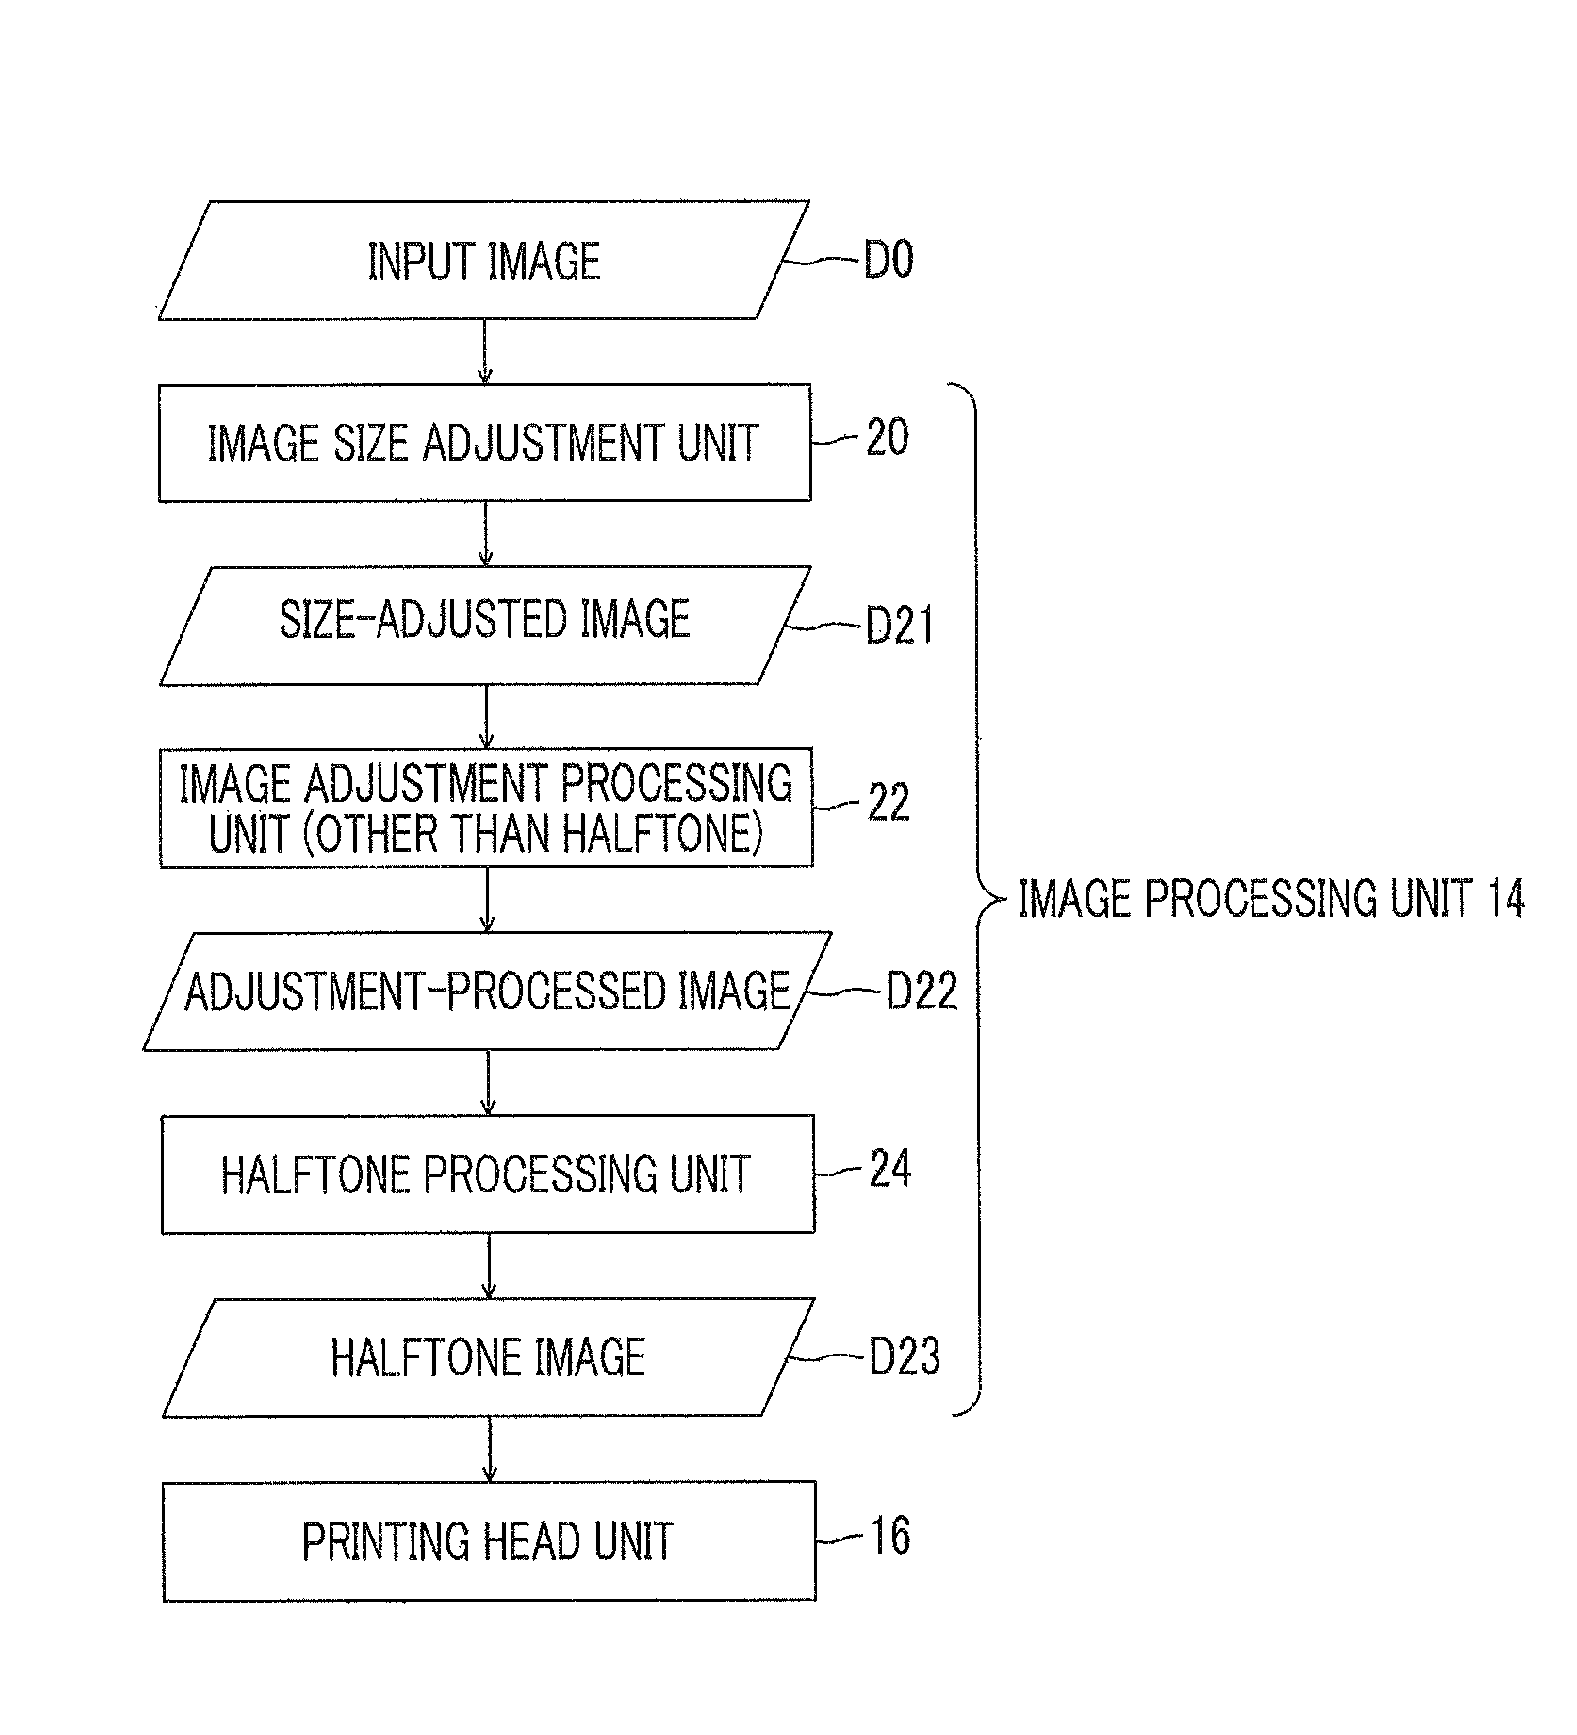 Image processing device adapting halftone process to plural printing modes with different resolution and dot arrangement